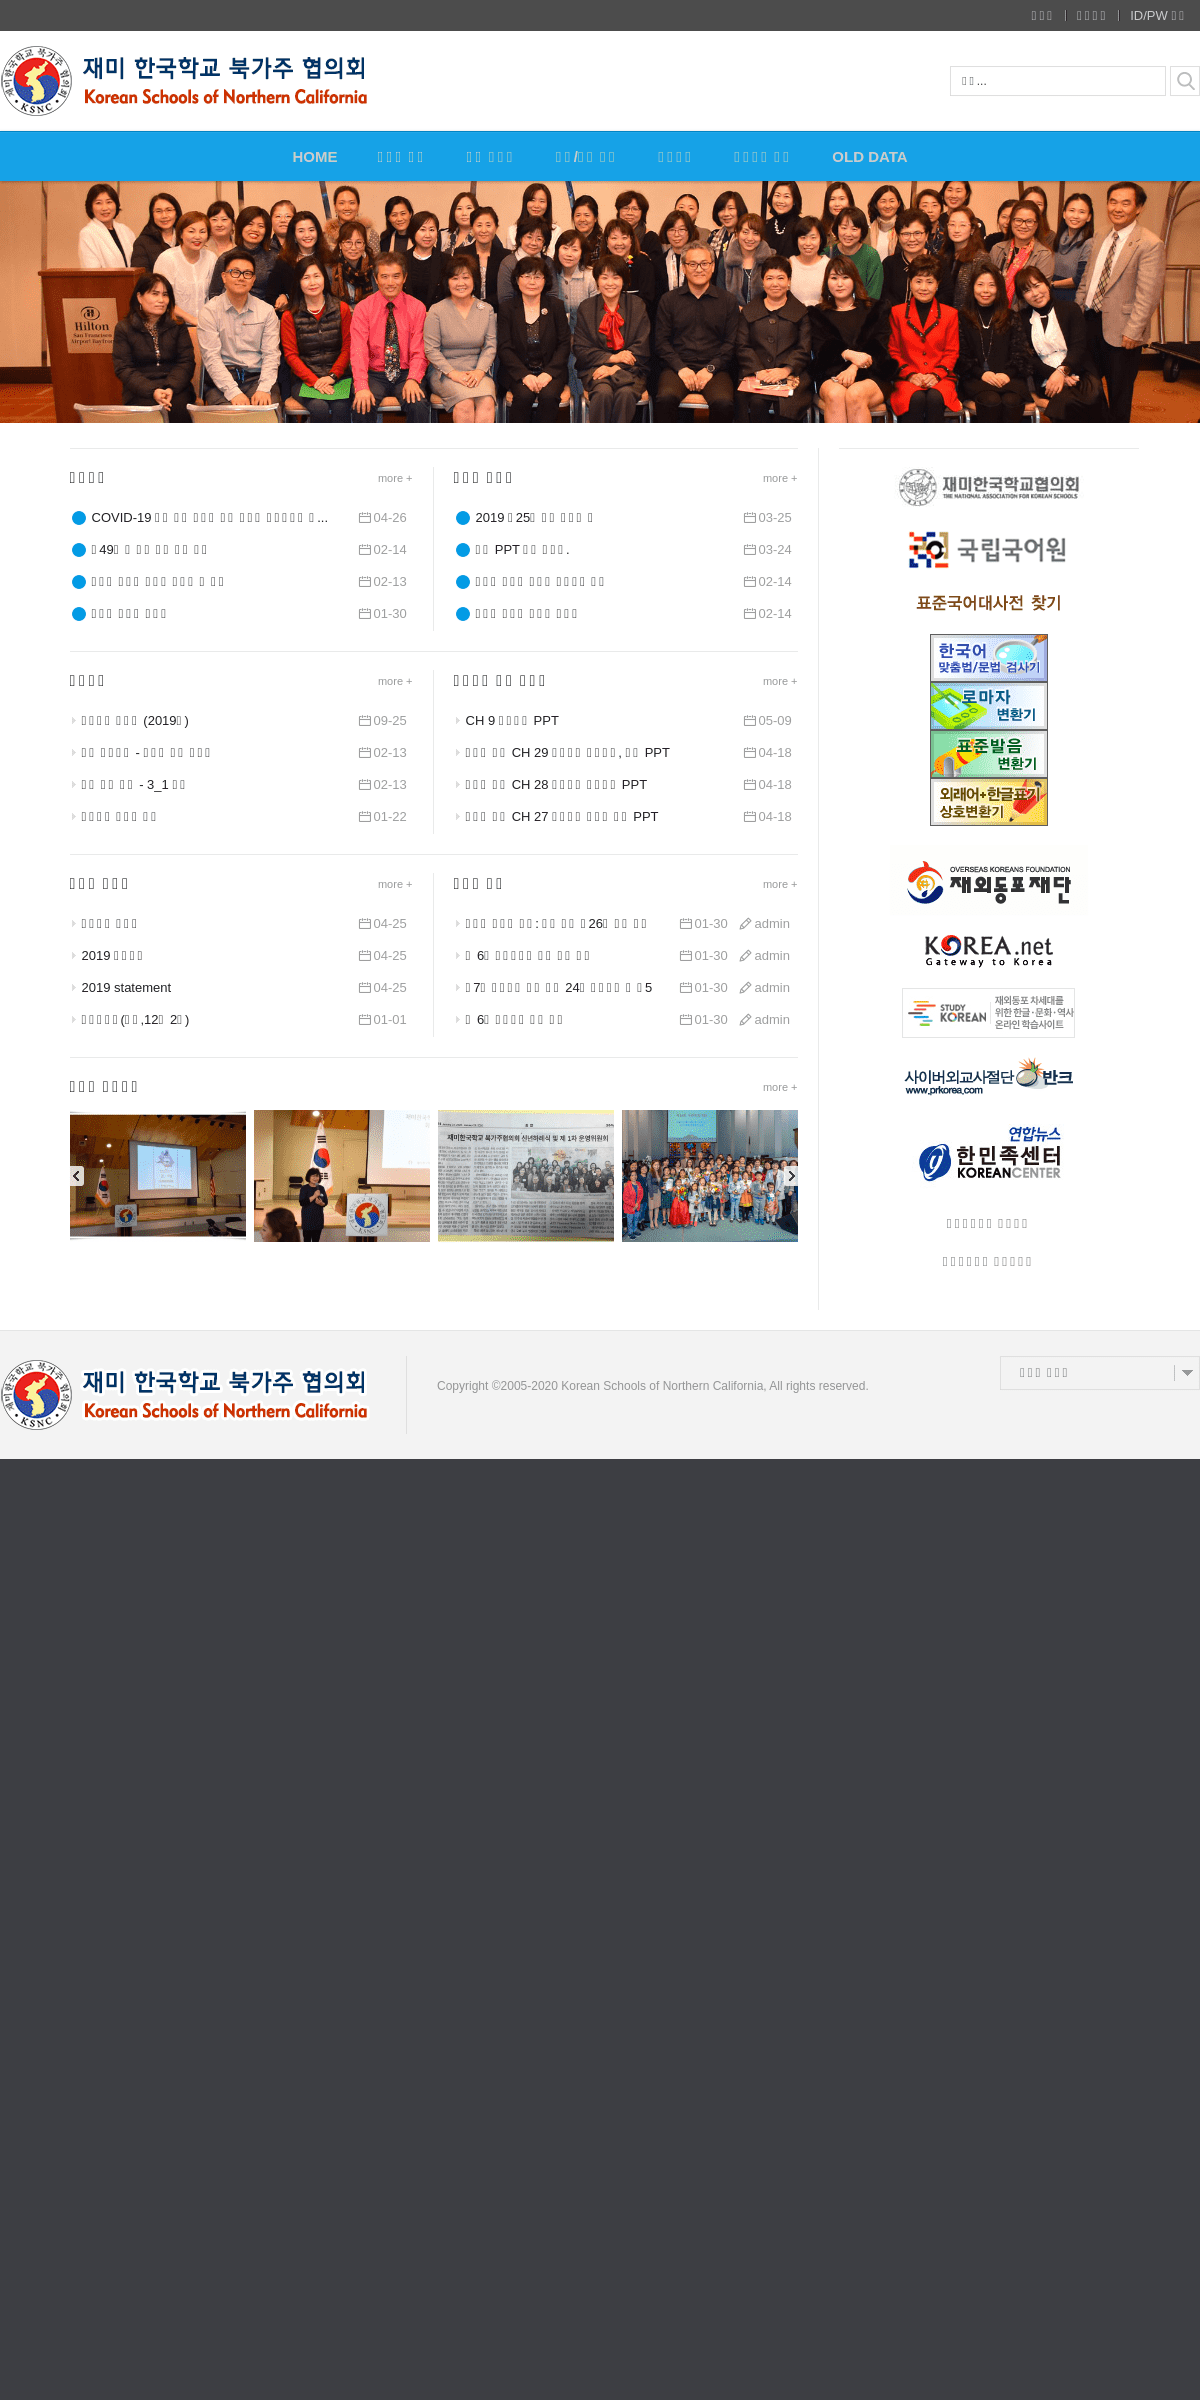 A complete backup of koreanschoolca.org